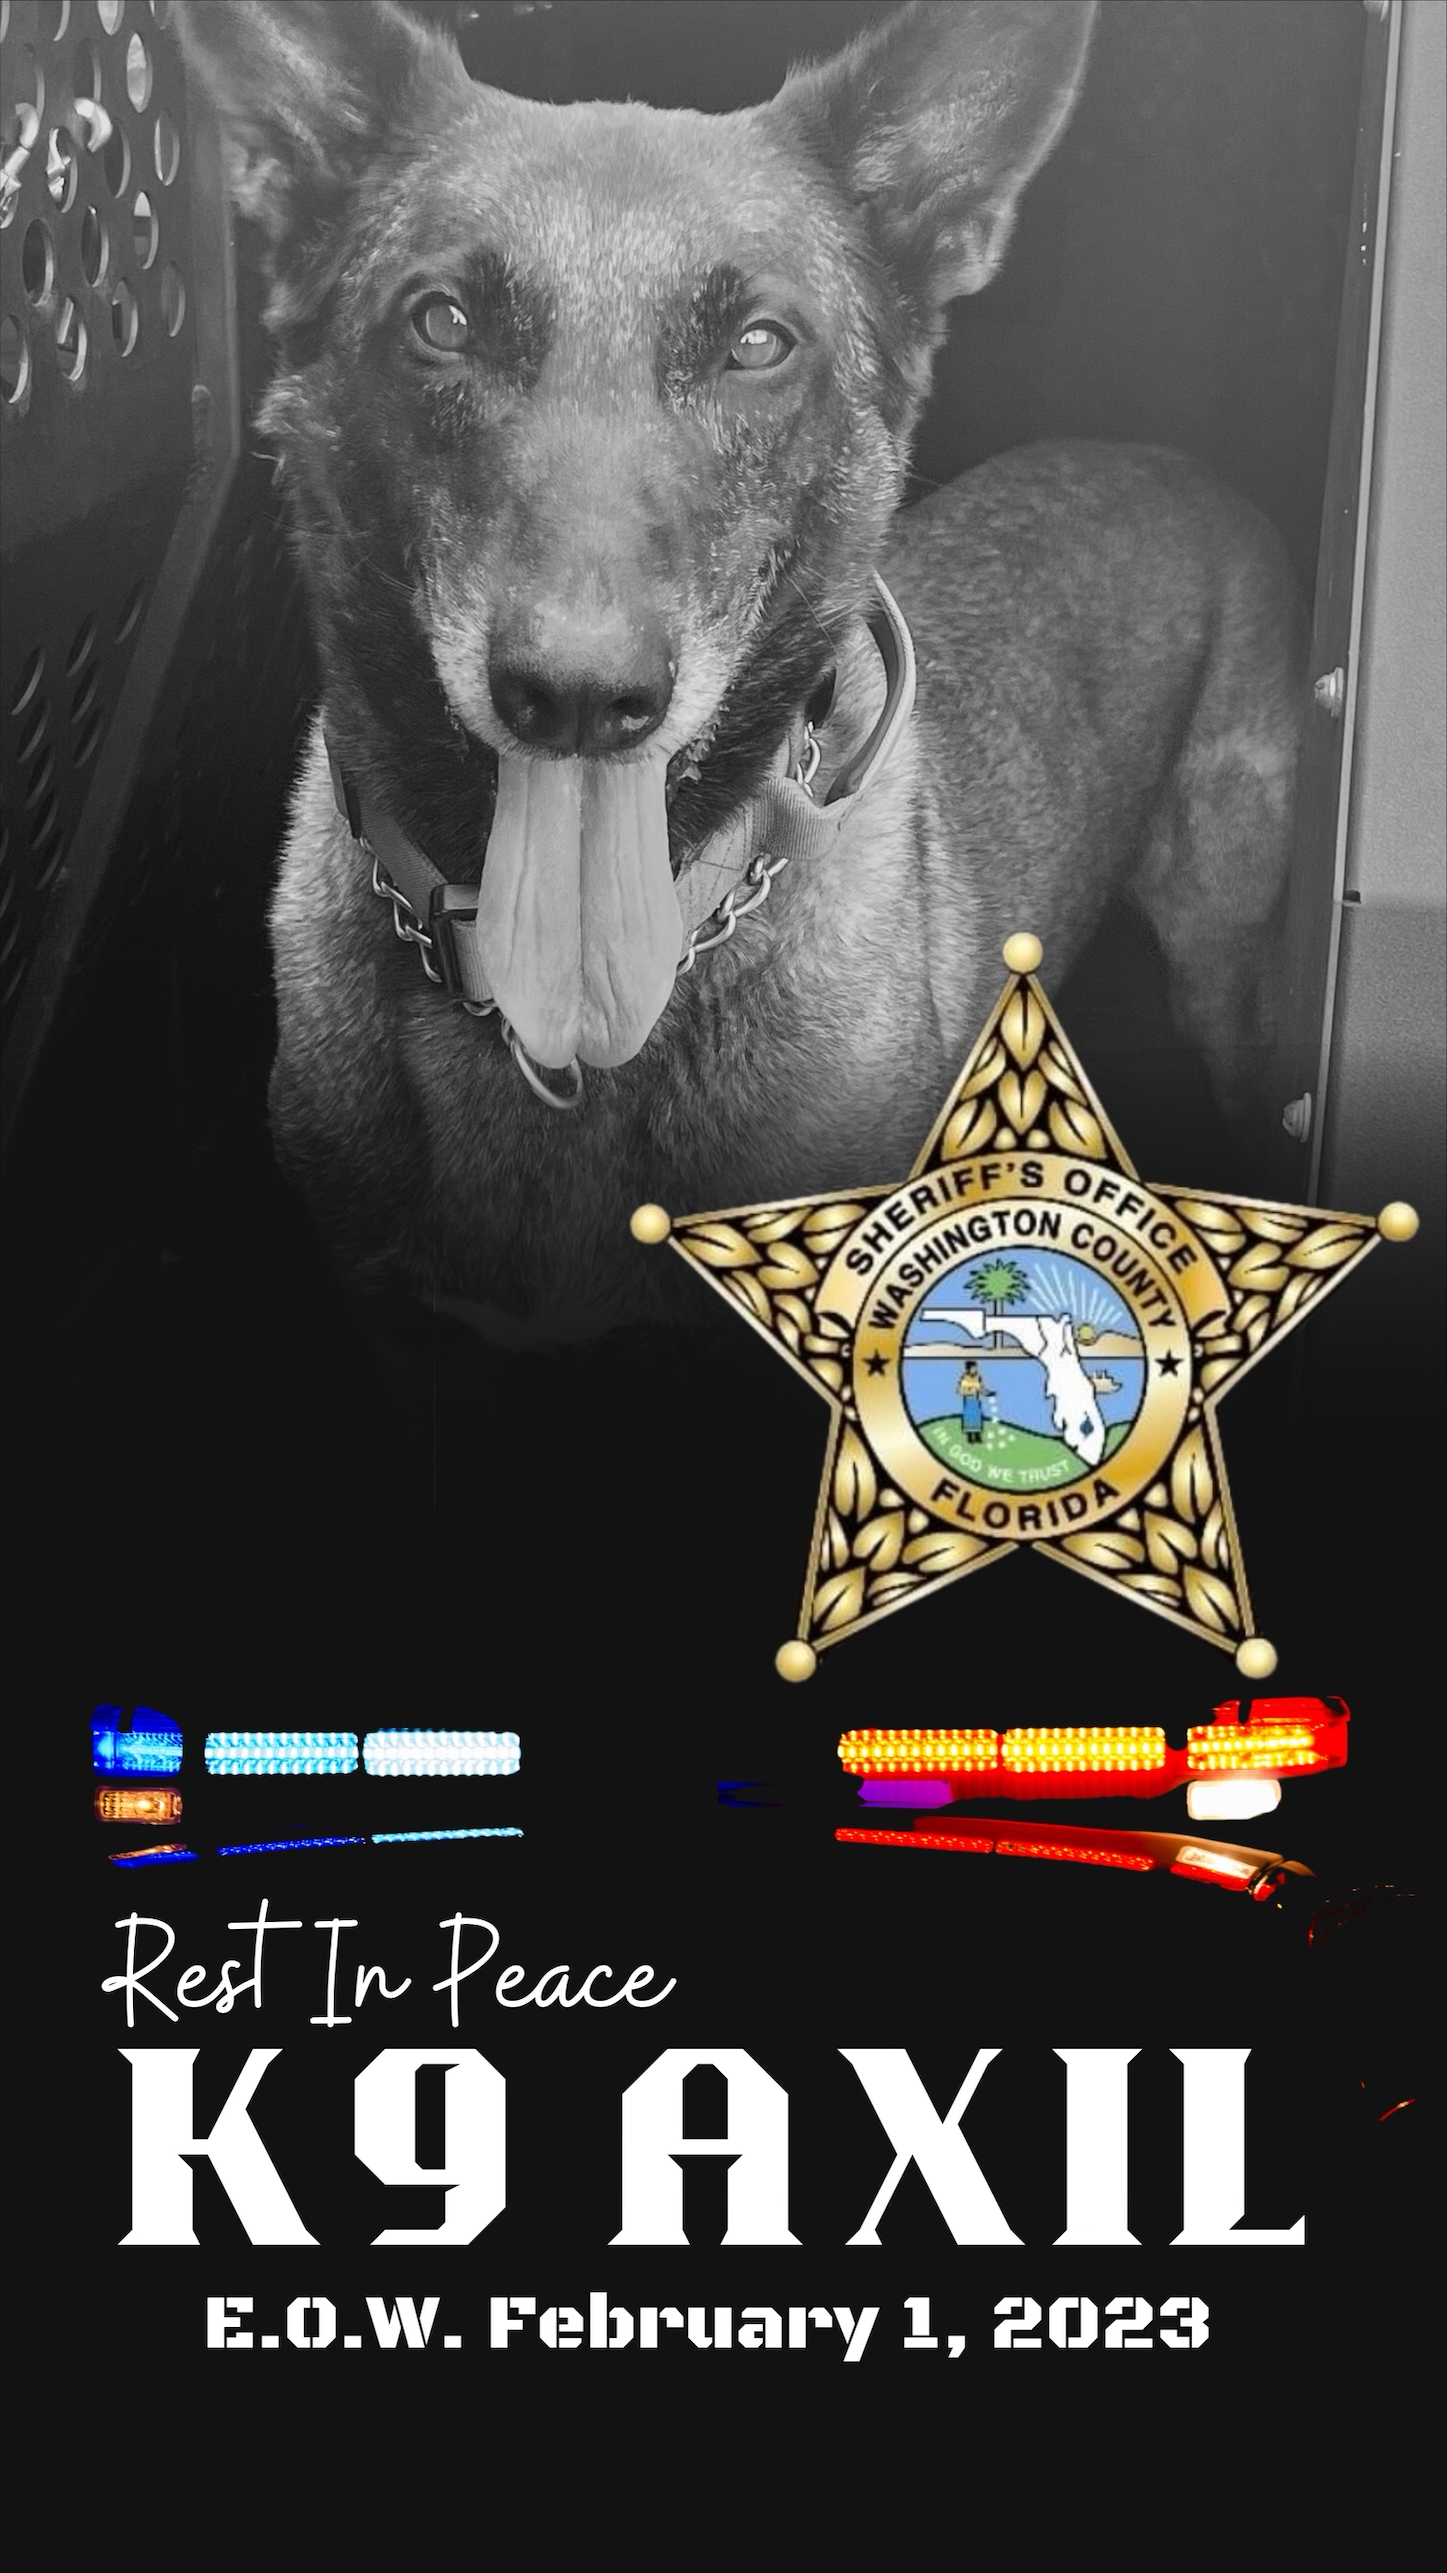 WCSO mourns passing of K-9 Axil